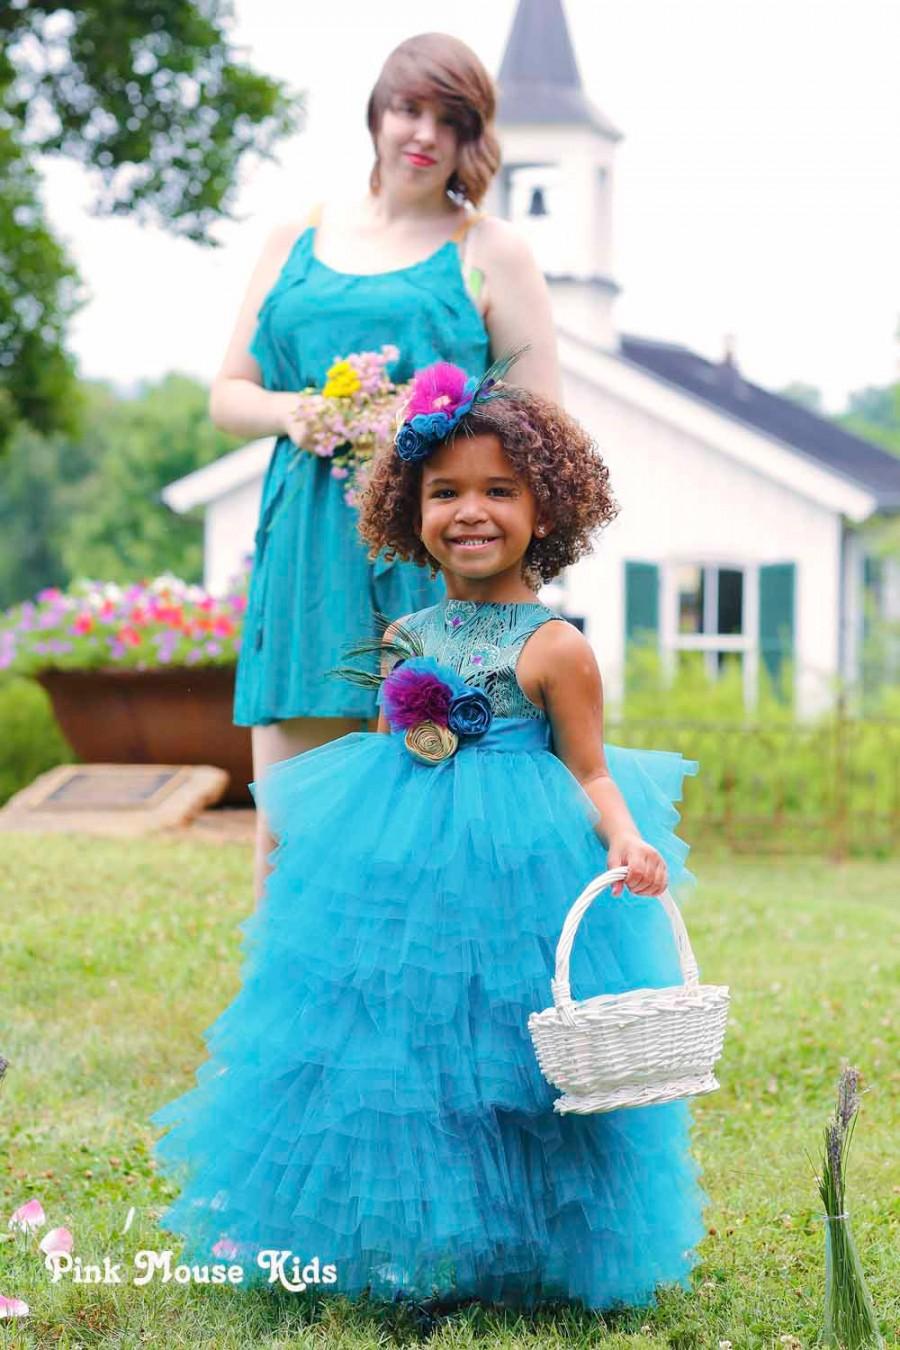 Mariage - Peacock Flower Girl Dresses - Boutique Flower Girl Dresses - Custom Made Flower Girl Dresses - Flower Girl Tutu Dress - Sizes 2T to 8 Years